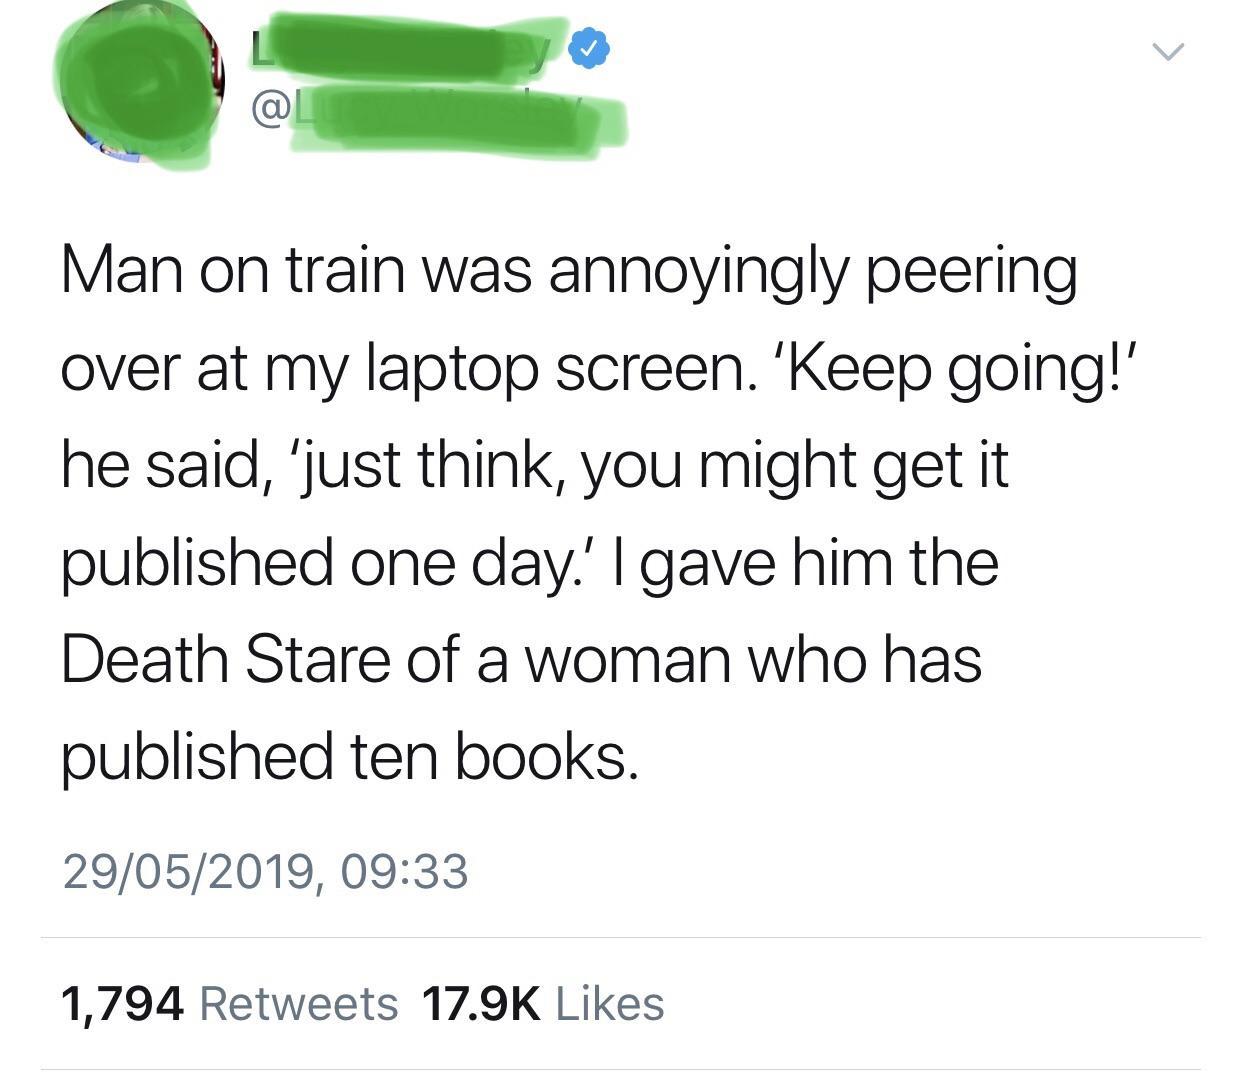 online liars- angle - Man on train was annoyingly peering over at my laptop screen. 'Keep going!' he said, 'just think, you might get it published one day.'I gave him the Death Stare of a woman who has published ten books. 29052019, 1,794